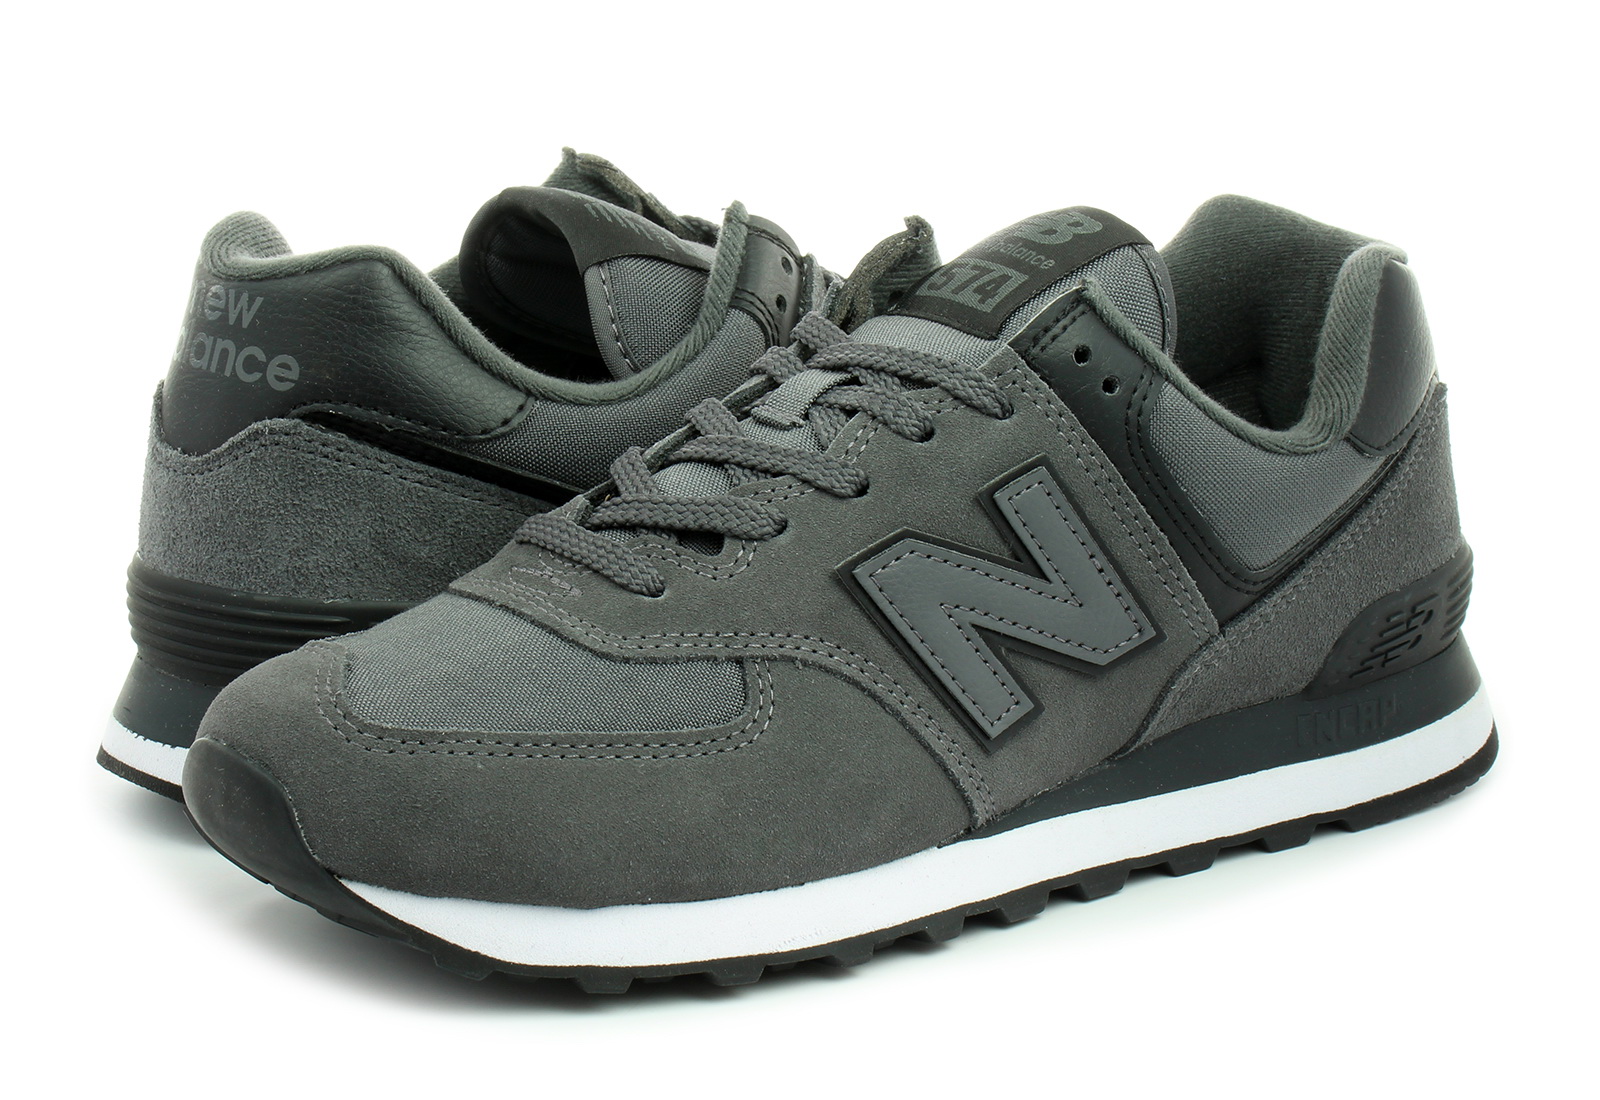 new balance 574 office shoes